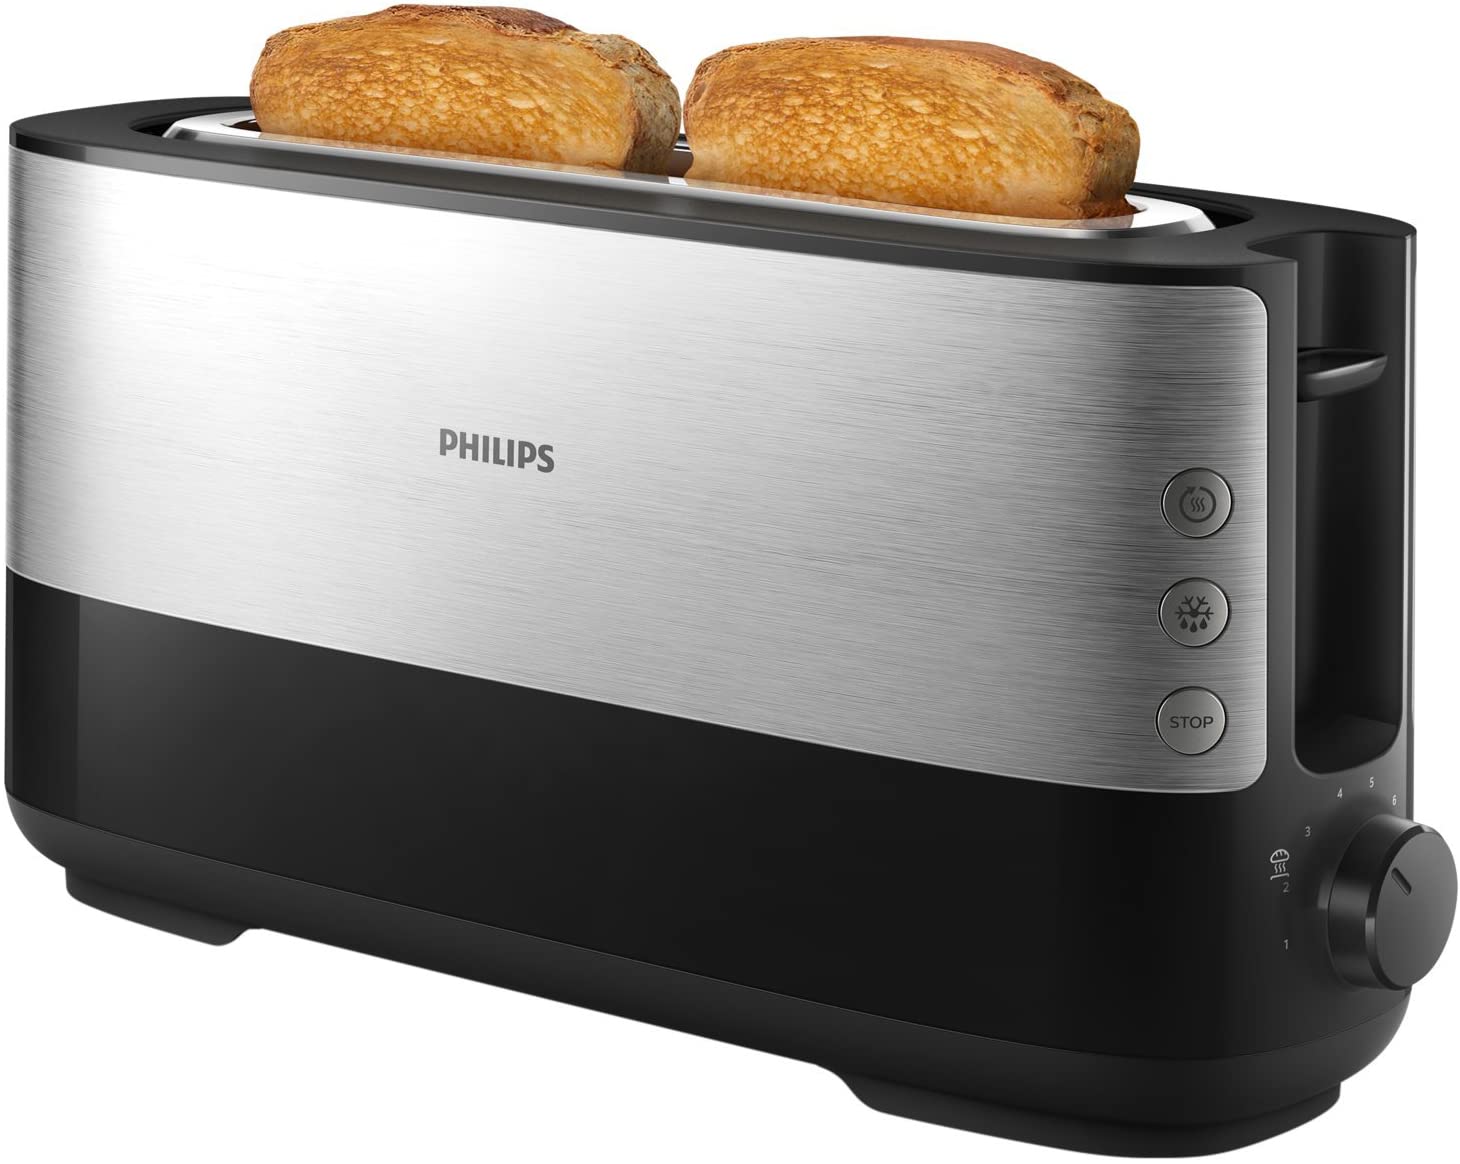 Philips Domestic Appliances Philips Long Slot Toaster, Stainless Steel, Black